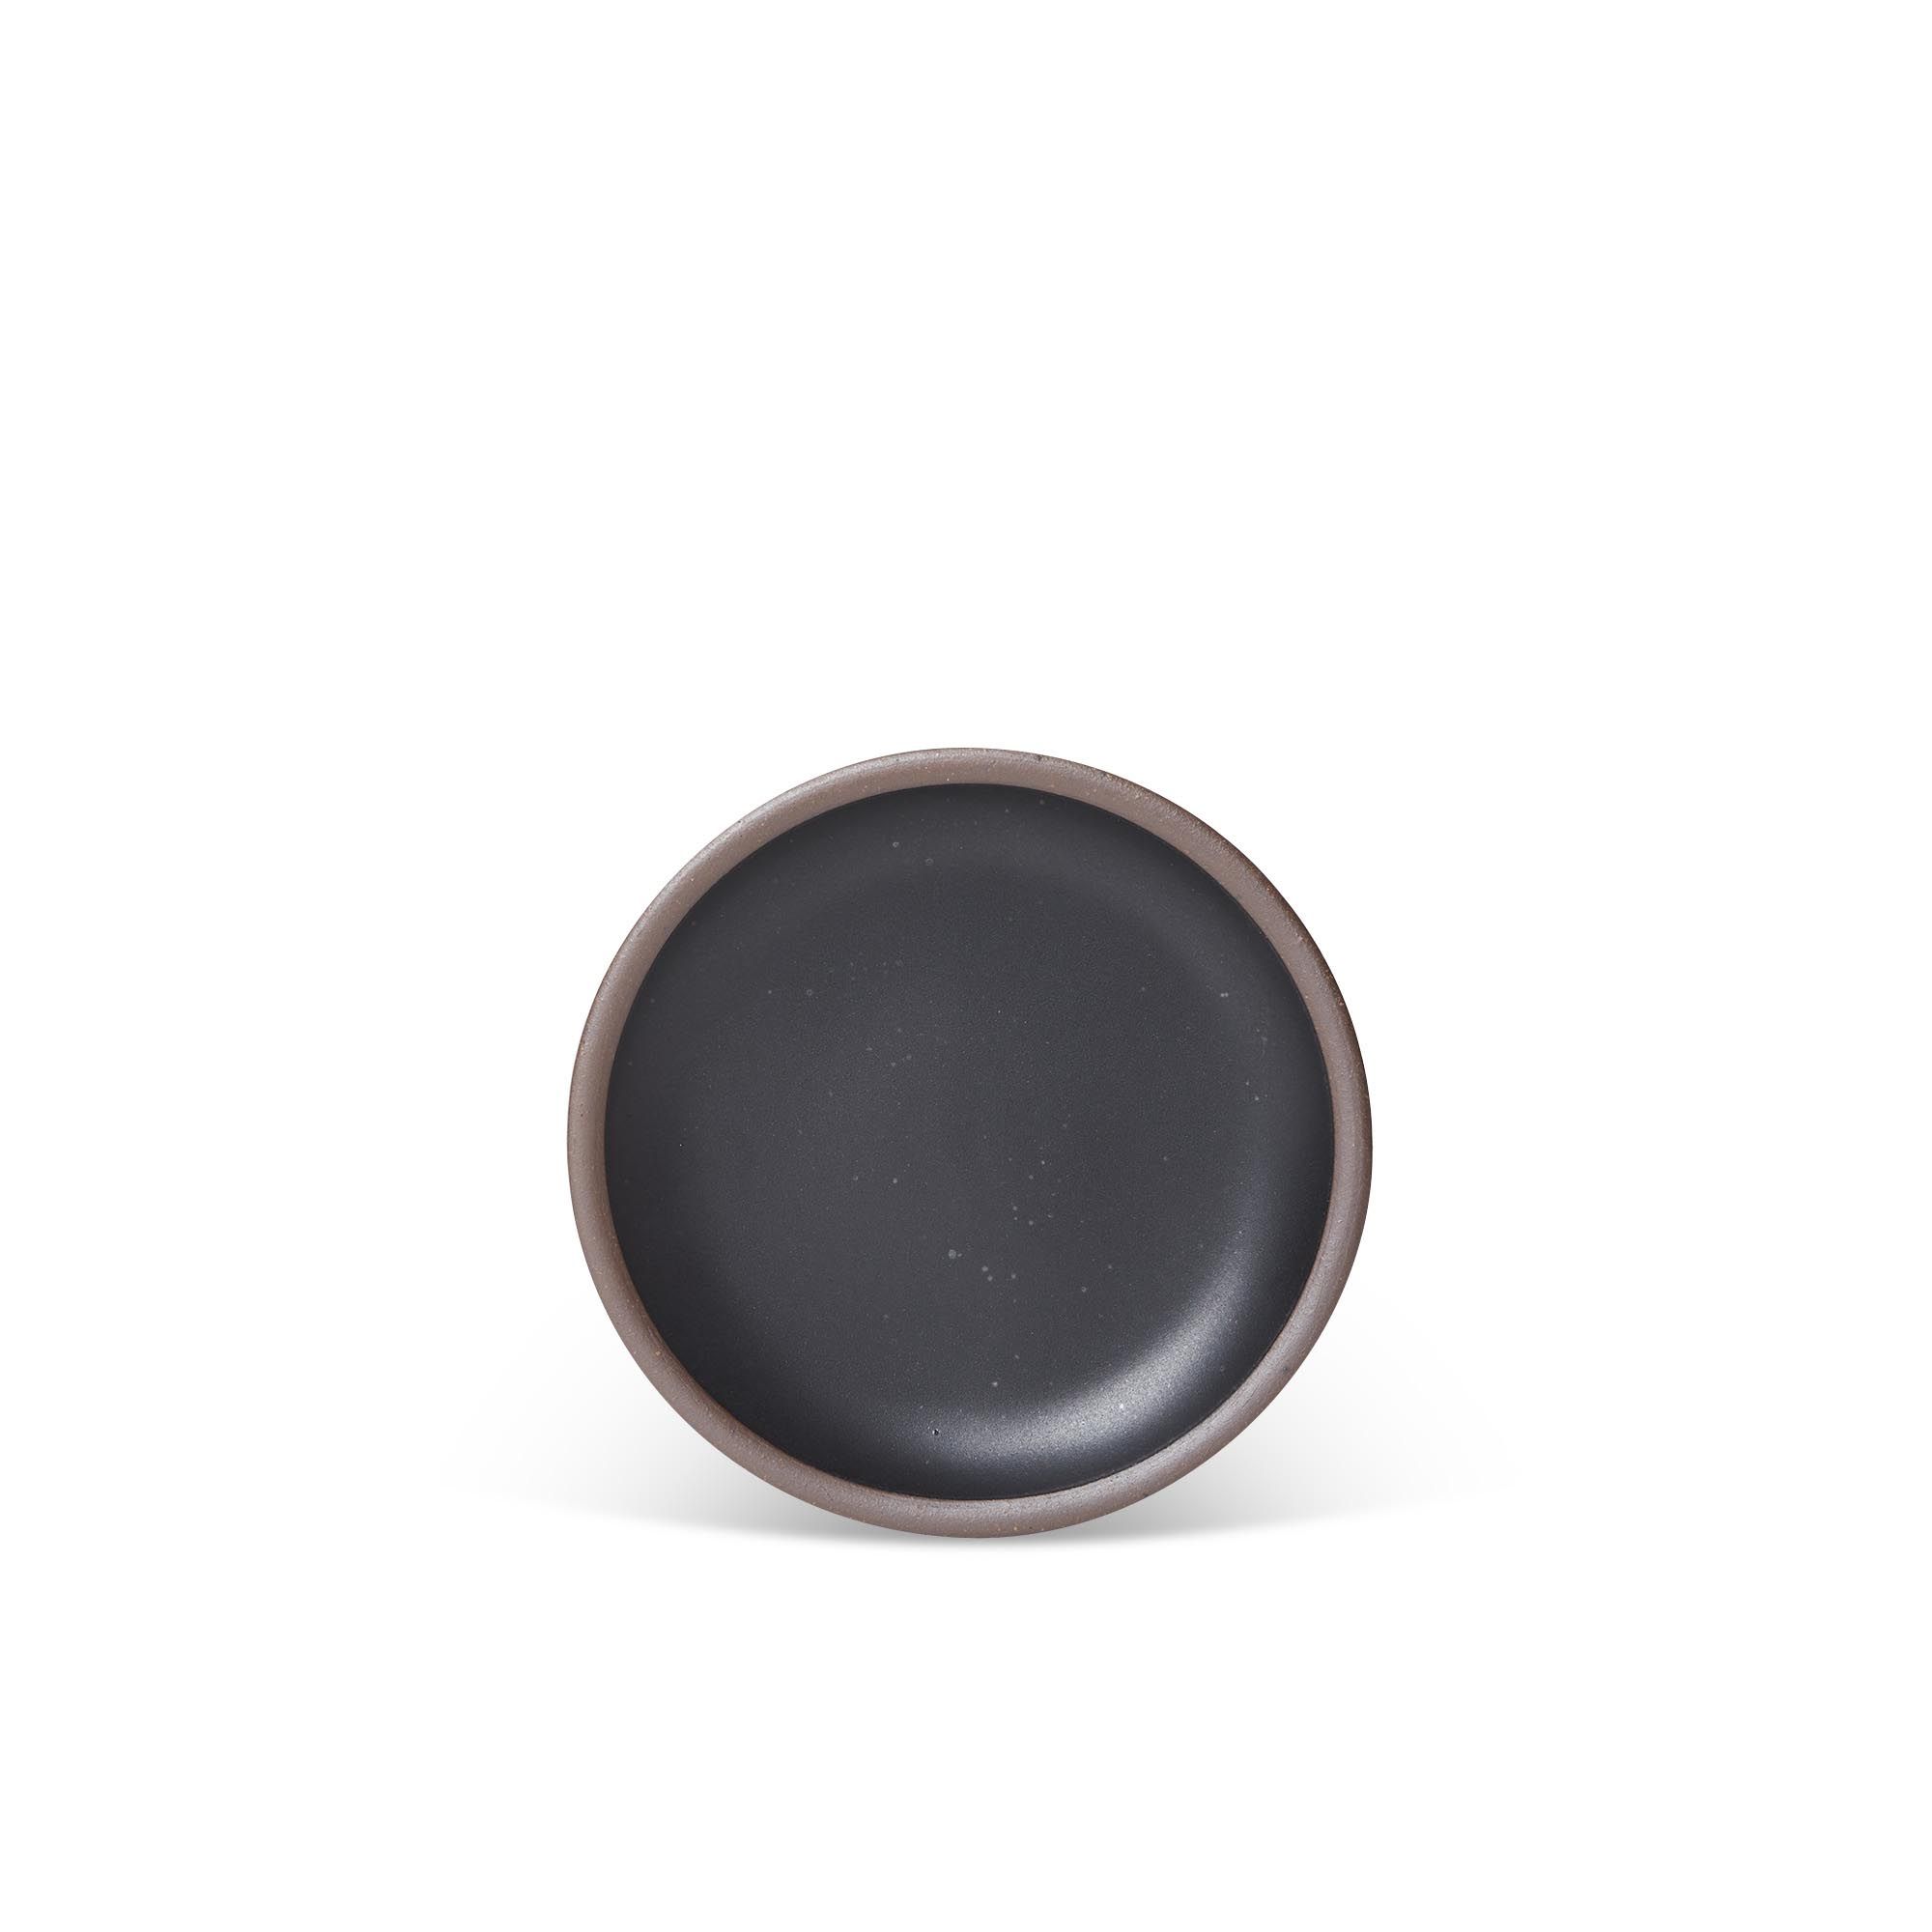 A dessert sized ceramic plate in a graphite black color featuring iron speckles and an unglazed rim.